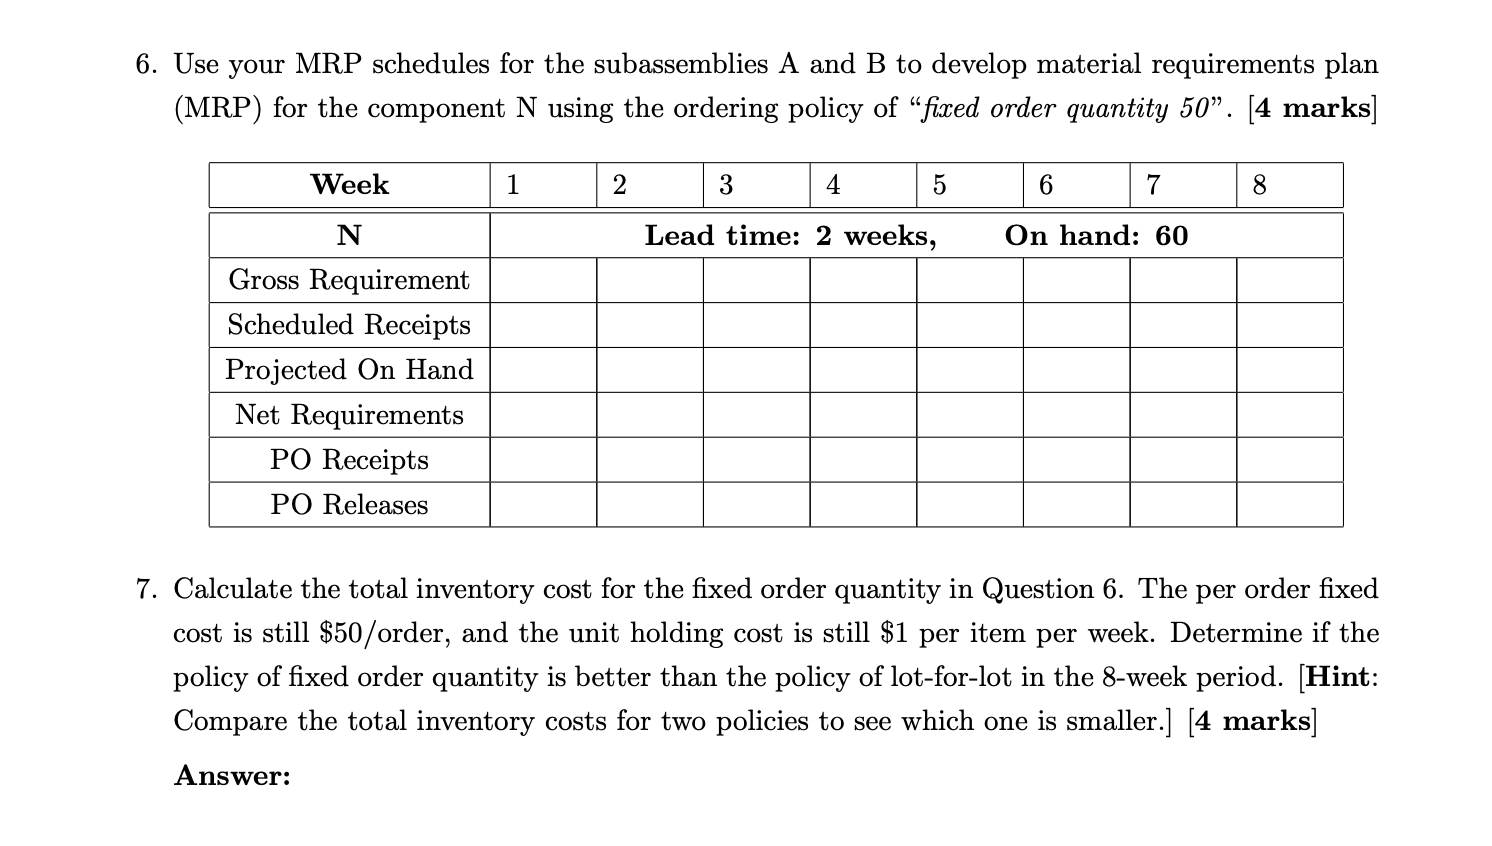 6. Use your MRP schedules for the subassemblies A and B to develop material requirements plan (MRP) for the